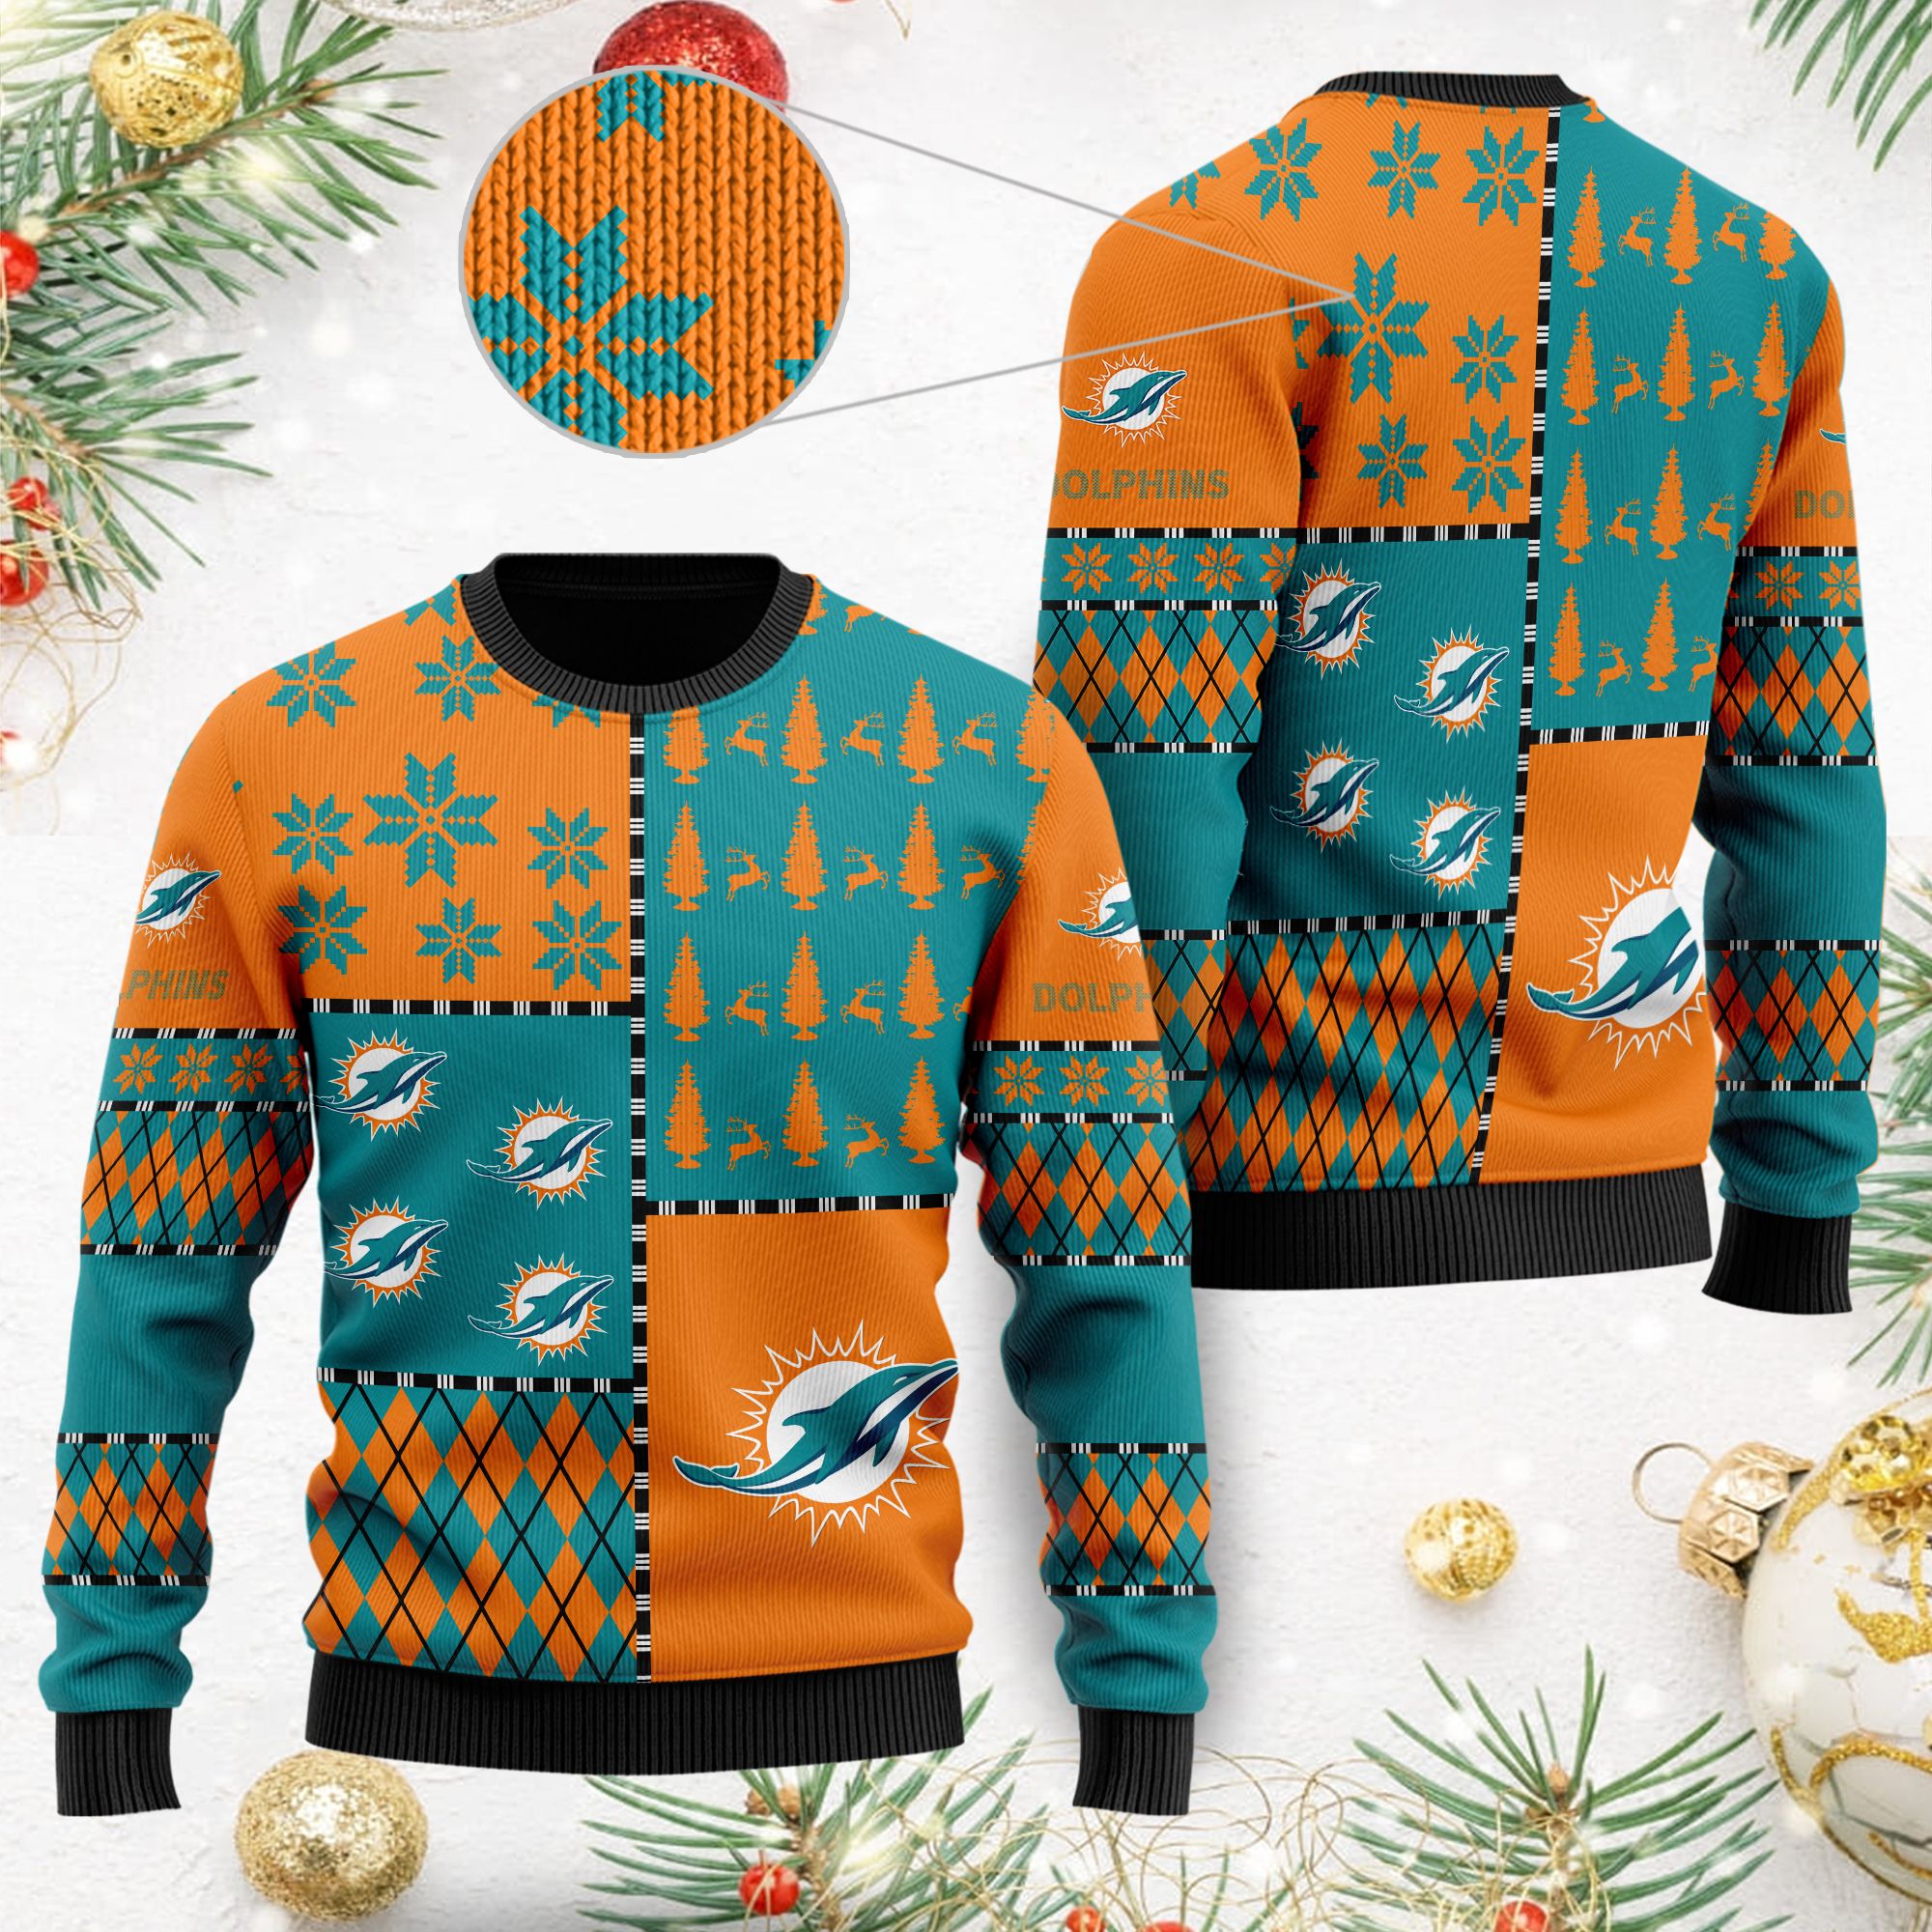 Miami Dolphins Shop - nfl miami dolphins sweater ugly christmas34097